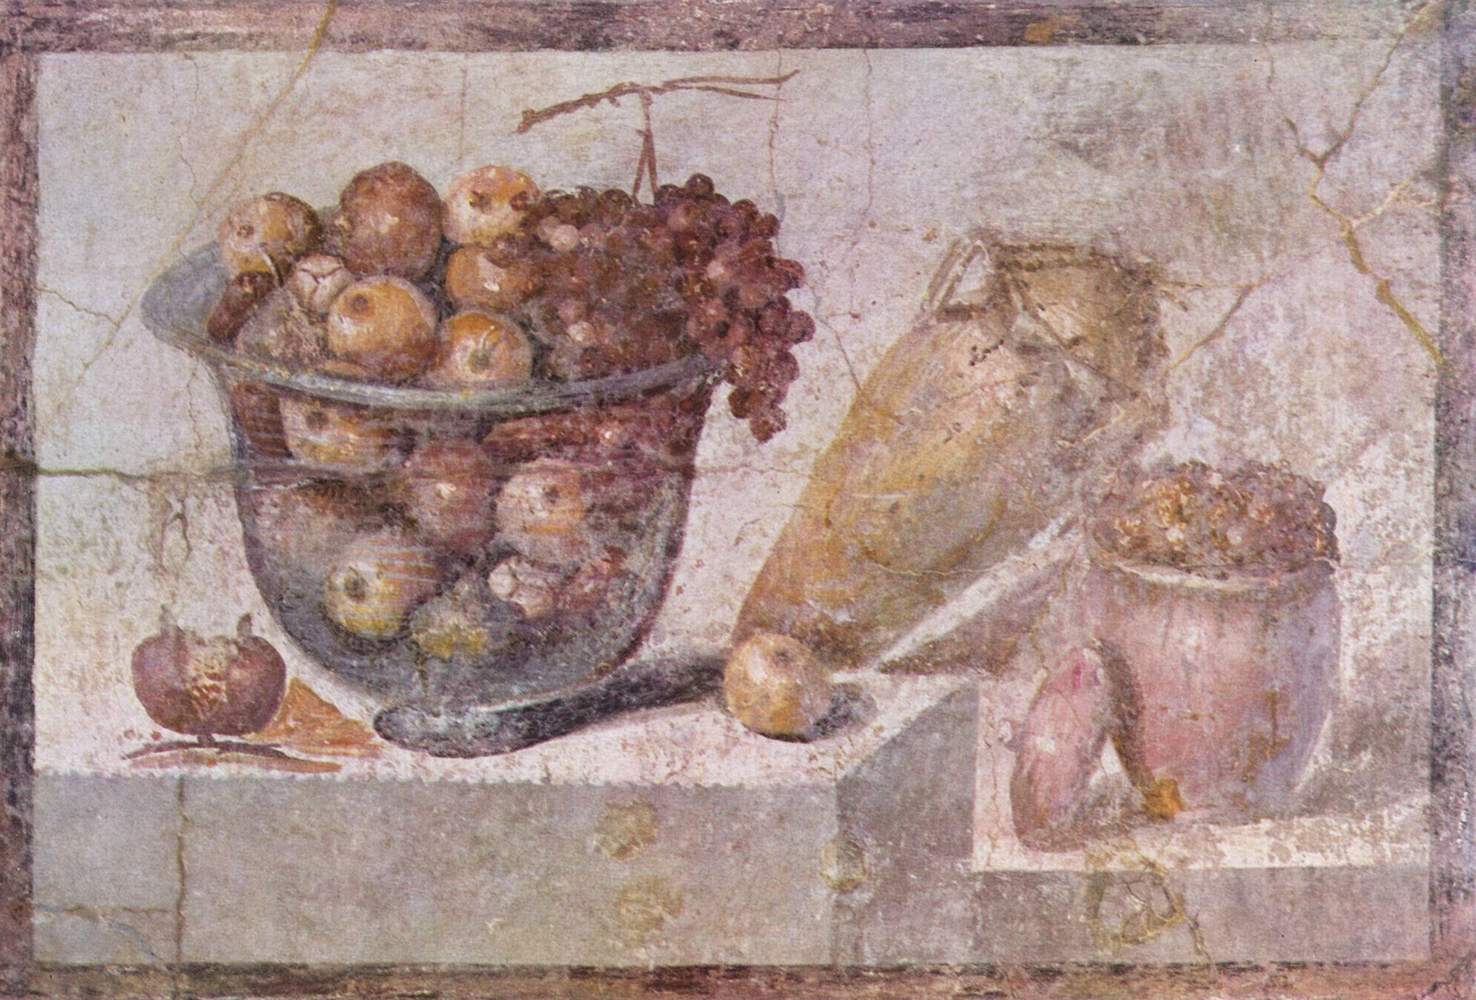 Roman painting. Second Pompeian Style, from the House of Julia Felix in Pompeii. Depicts a bowl of fruit and vases.